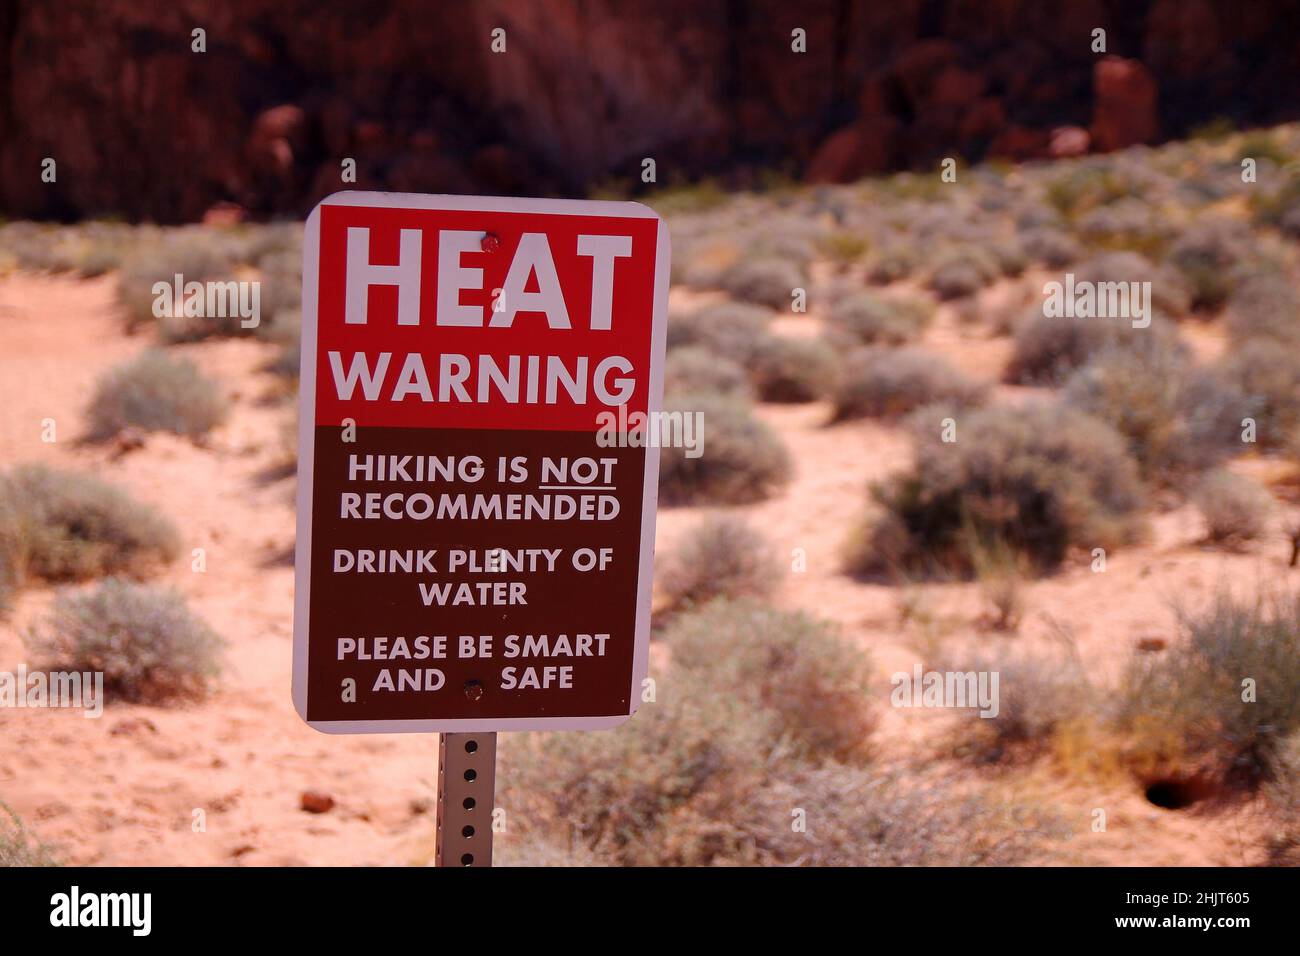 Heat Warning, Hiking is not recommended, drink plenty of water, please be smart and safe sign in the Valley of Fire State Park in Nevada Stock Photo